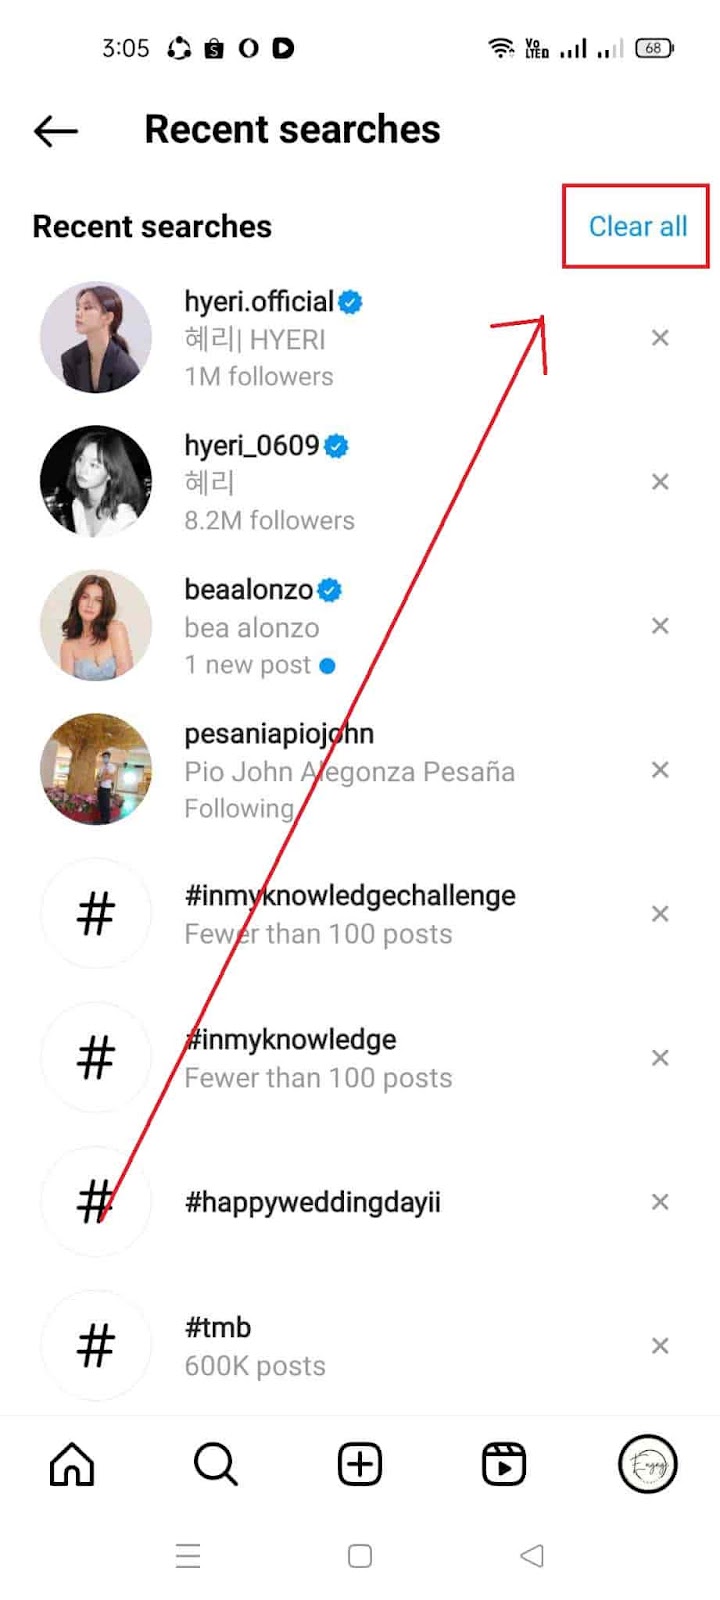 How to Clear Cache on Instagram - Clear All